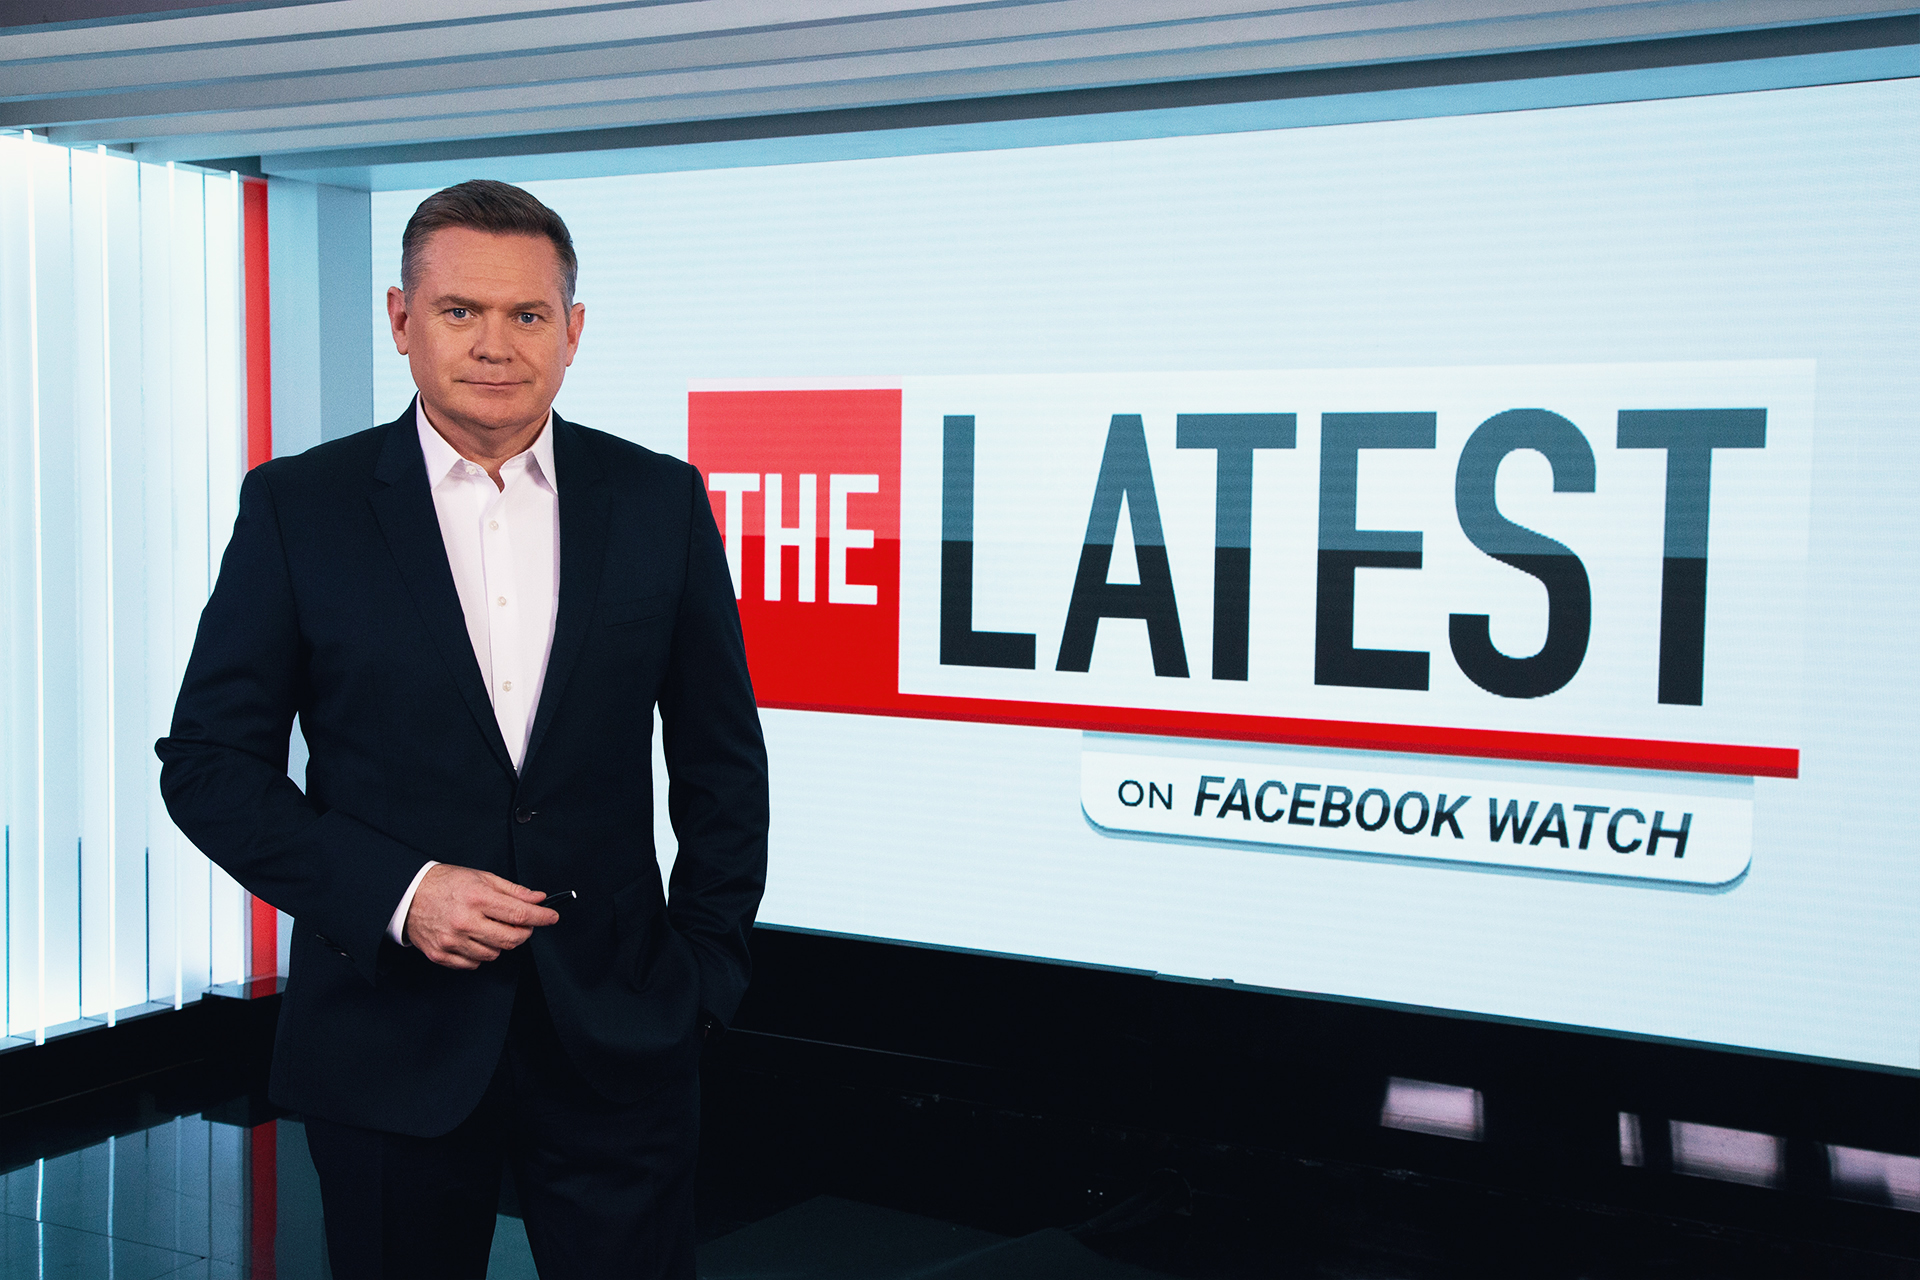   Michael Usher will present The Latest on Facebook Watch  image - SEVEN 